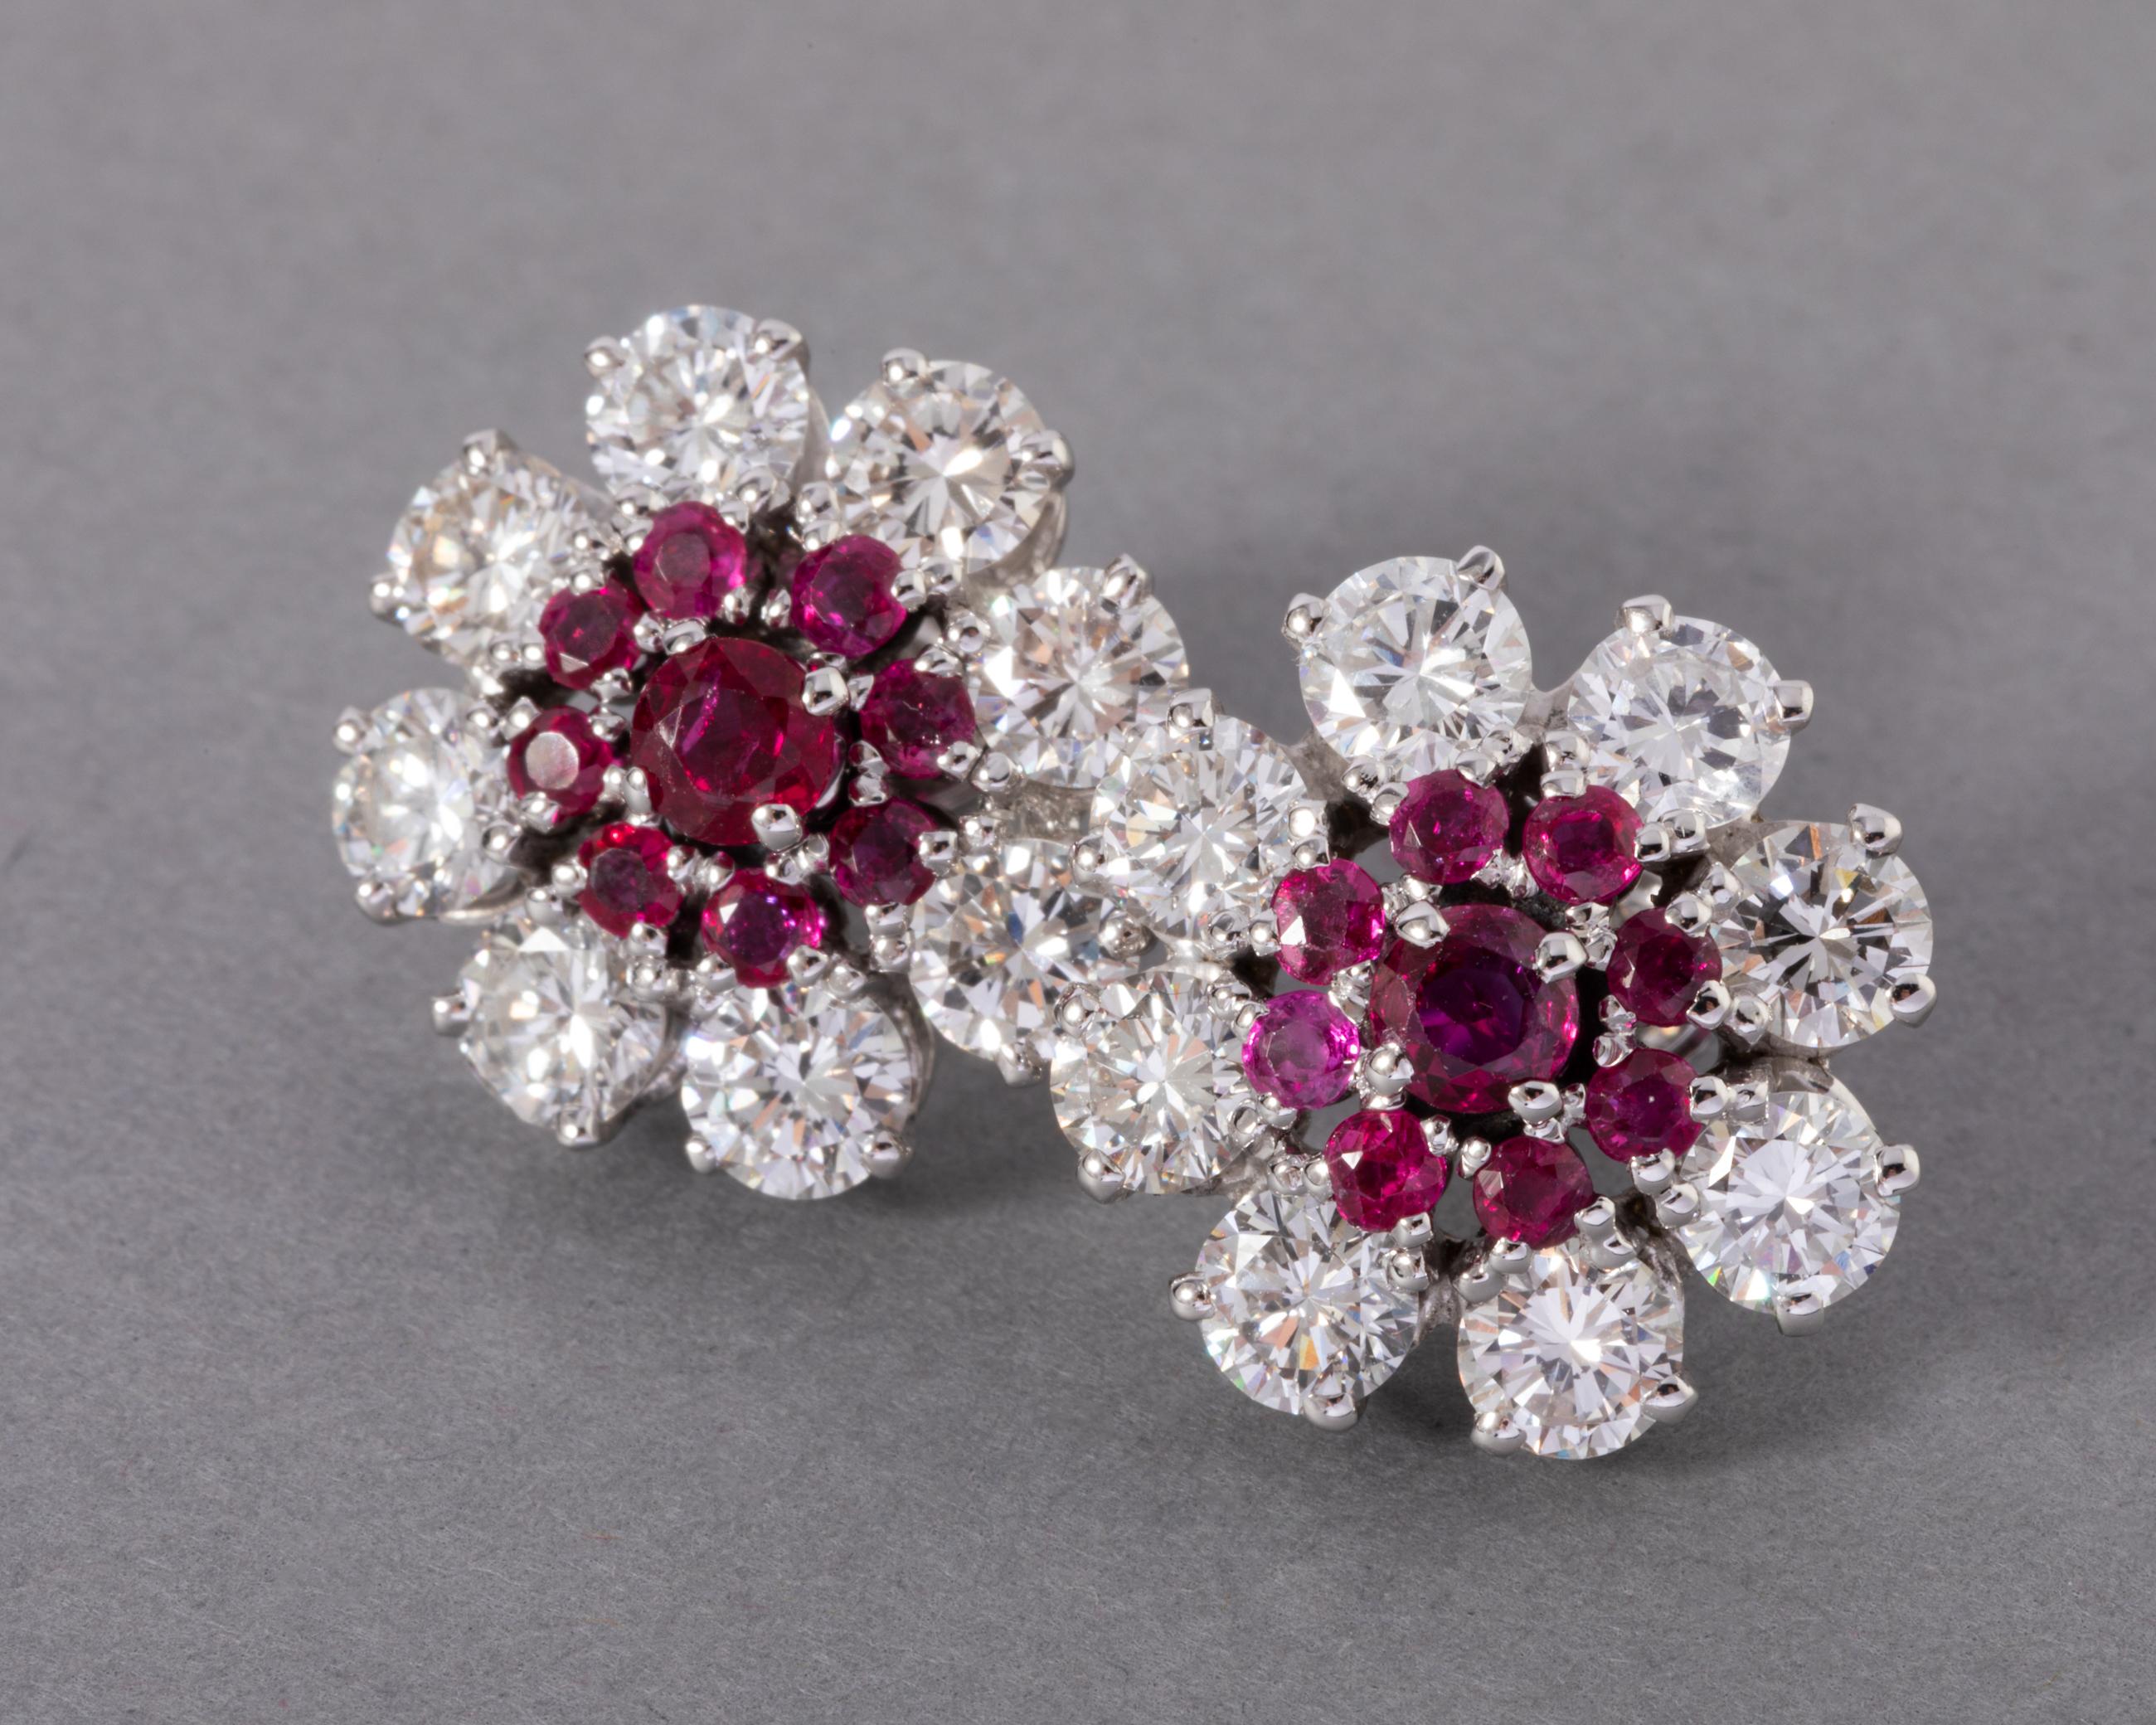 Brilliant Cut 4 Carats Diamonds and 1 Carat Rubies Vintage Earrings For Sale